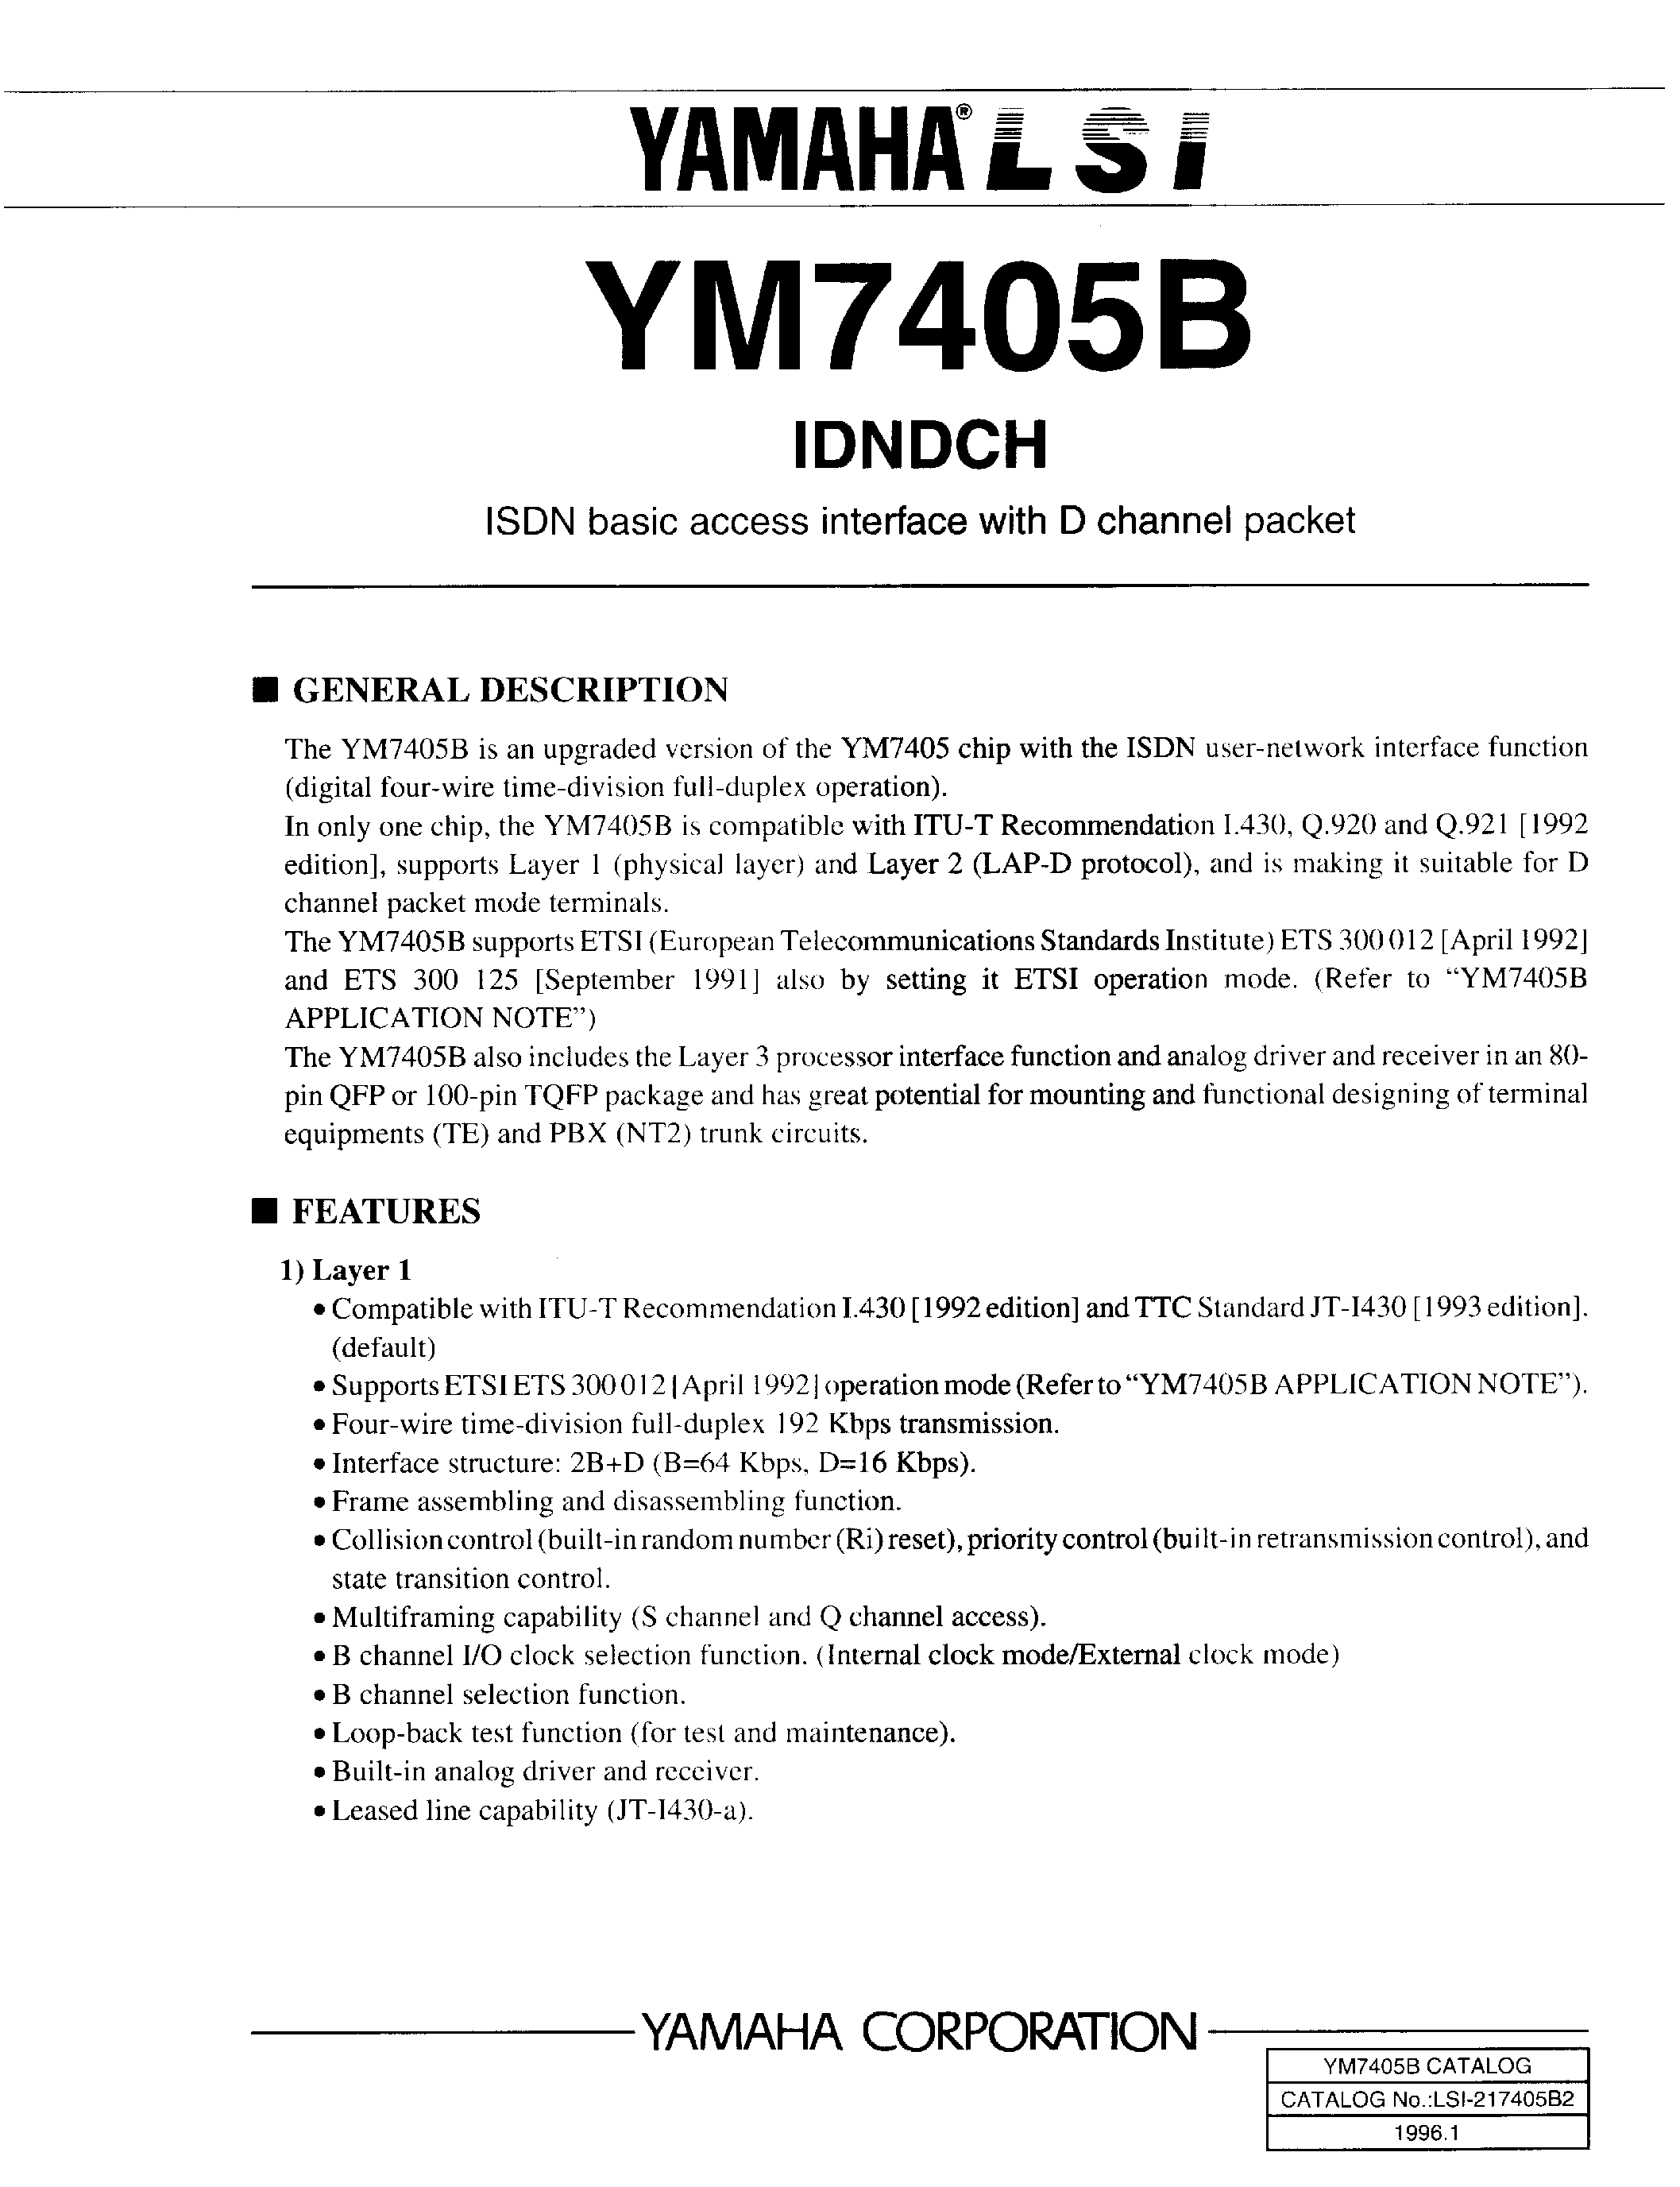 Datasheet YM7405B - ISDN BASIC ACCESS INTERFACE WITH D CHANNEL PACKET page 1